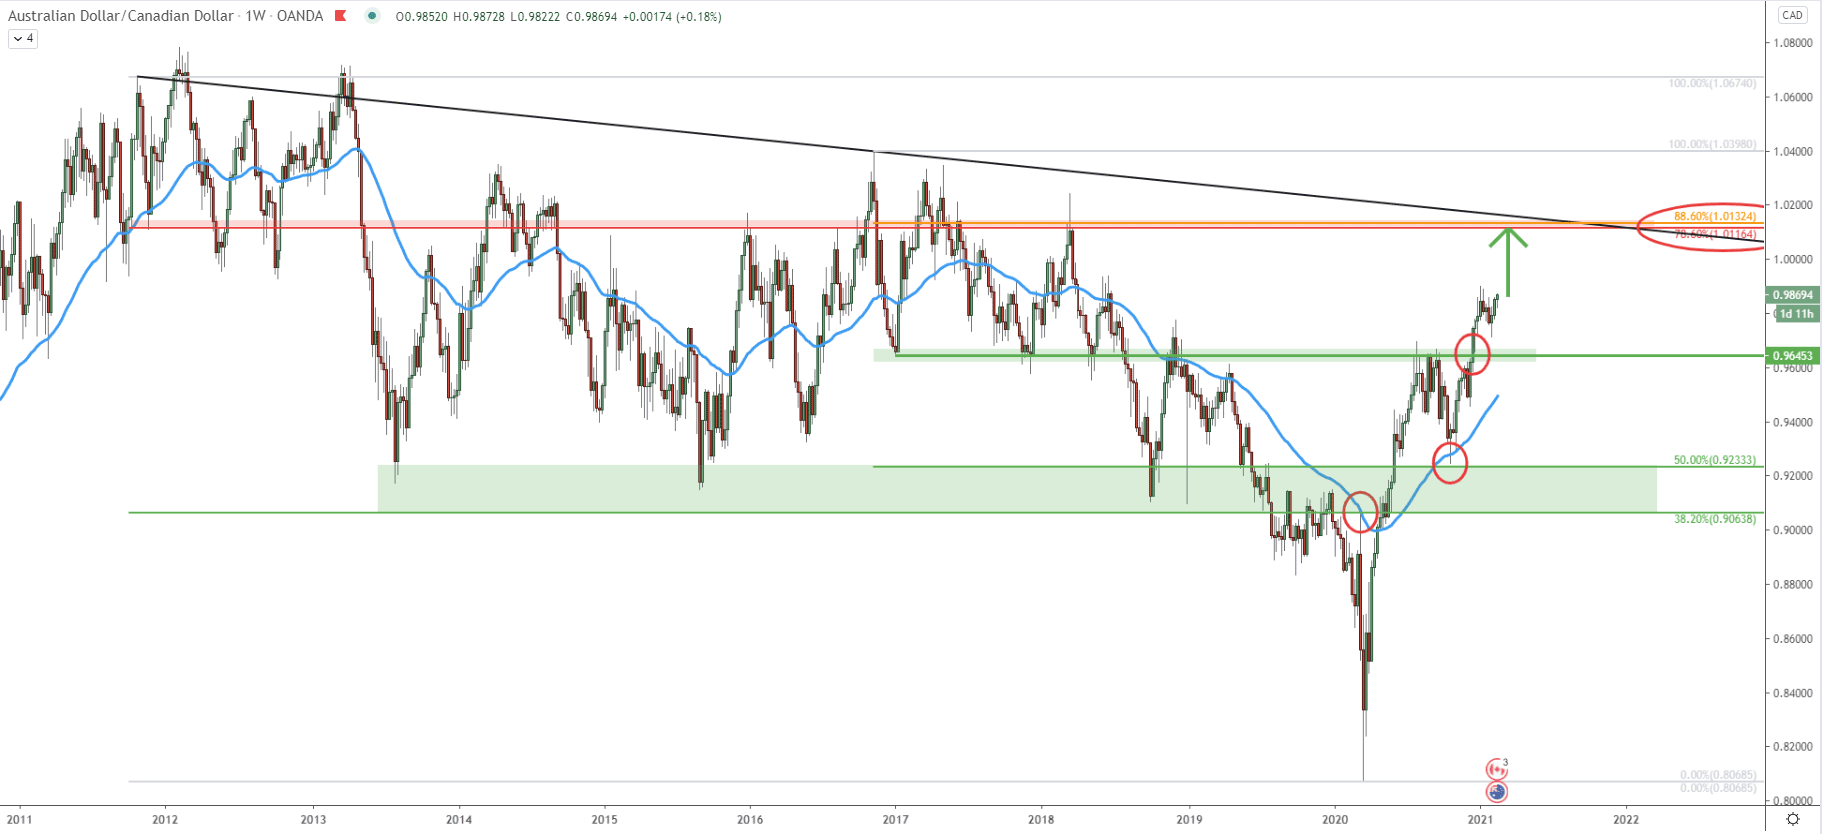 AUD/CAD Weekly Technical Analysis 18 Feb 2021